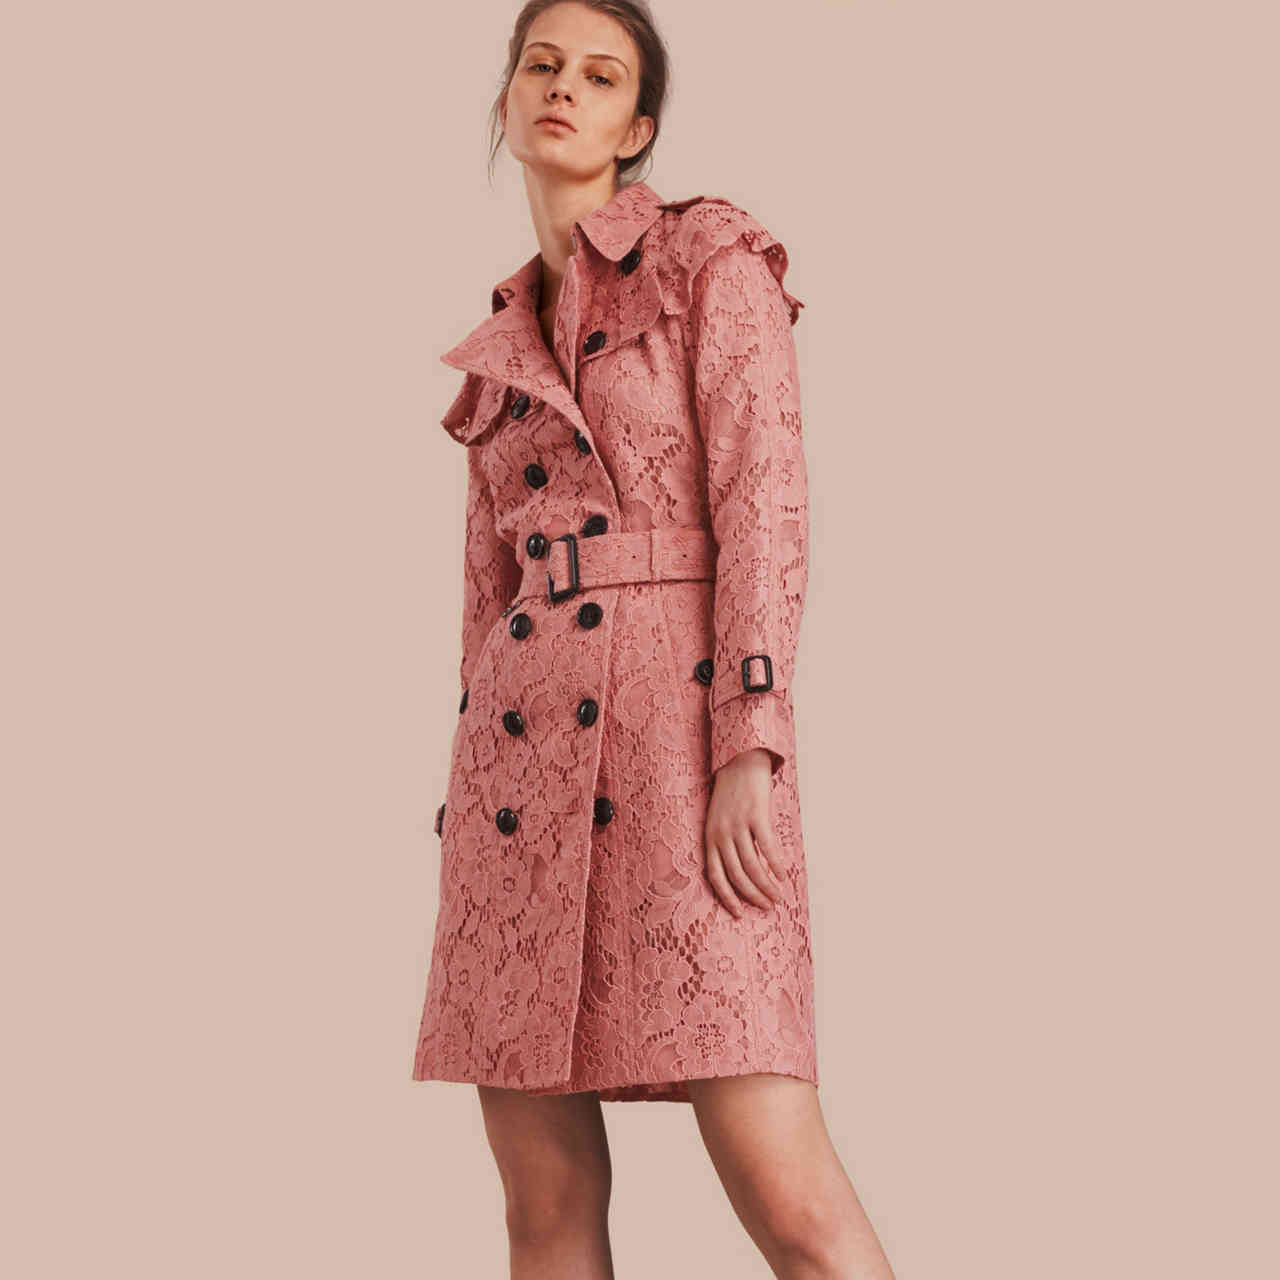 burberry pink lace trench